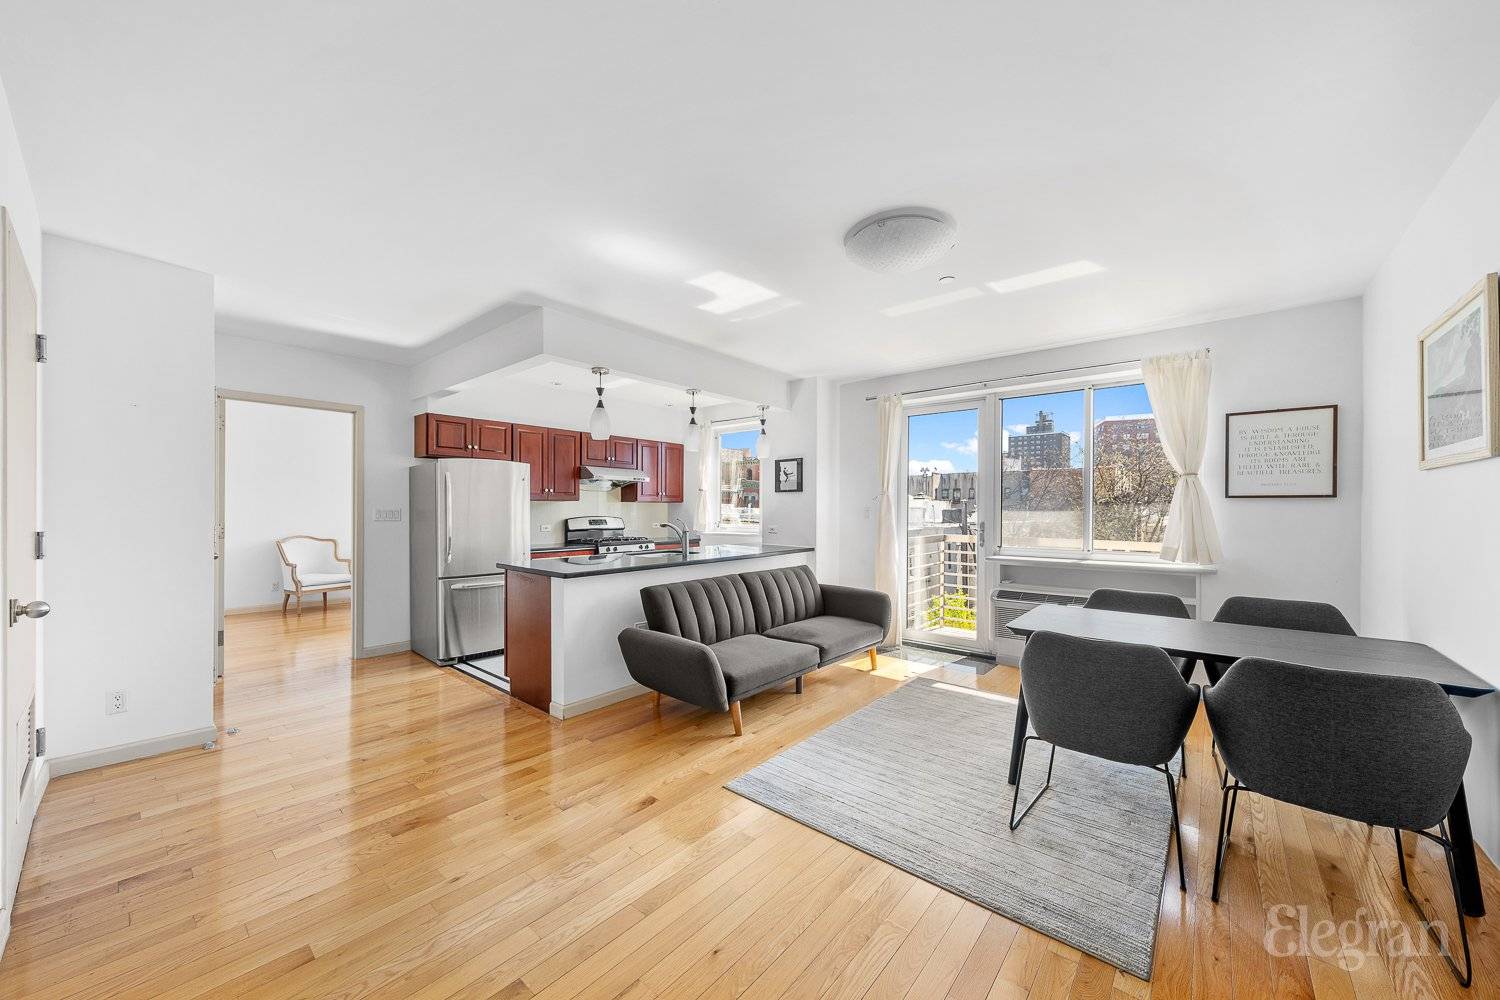 Rarely found in the vibrant East Harlem neighborhood, this one bedroom apartment with a balcony at the Lexington Hill Condominiums offers a unique opportunity.